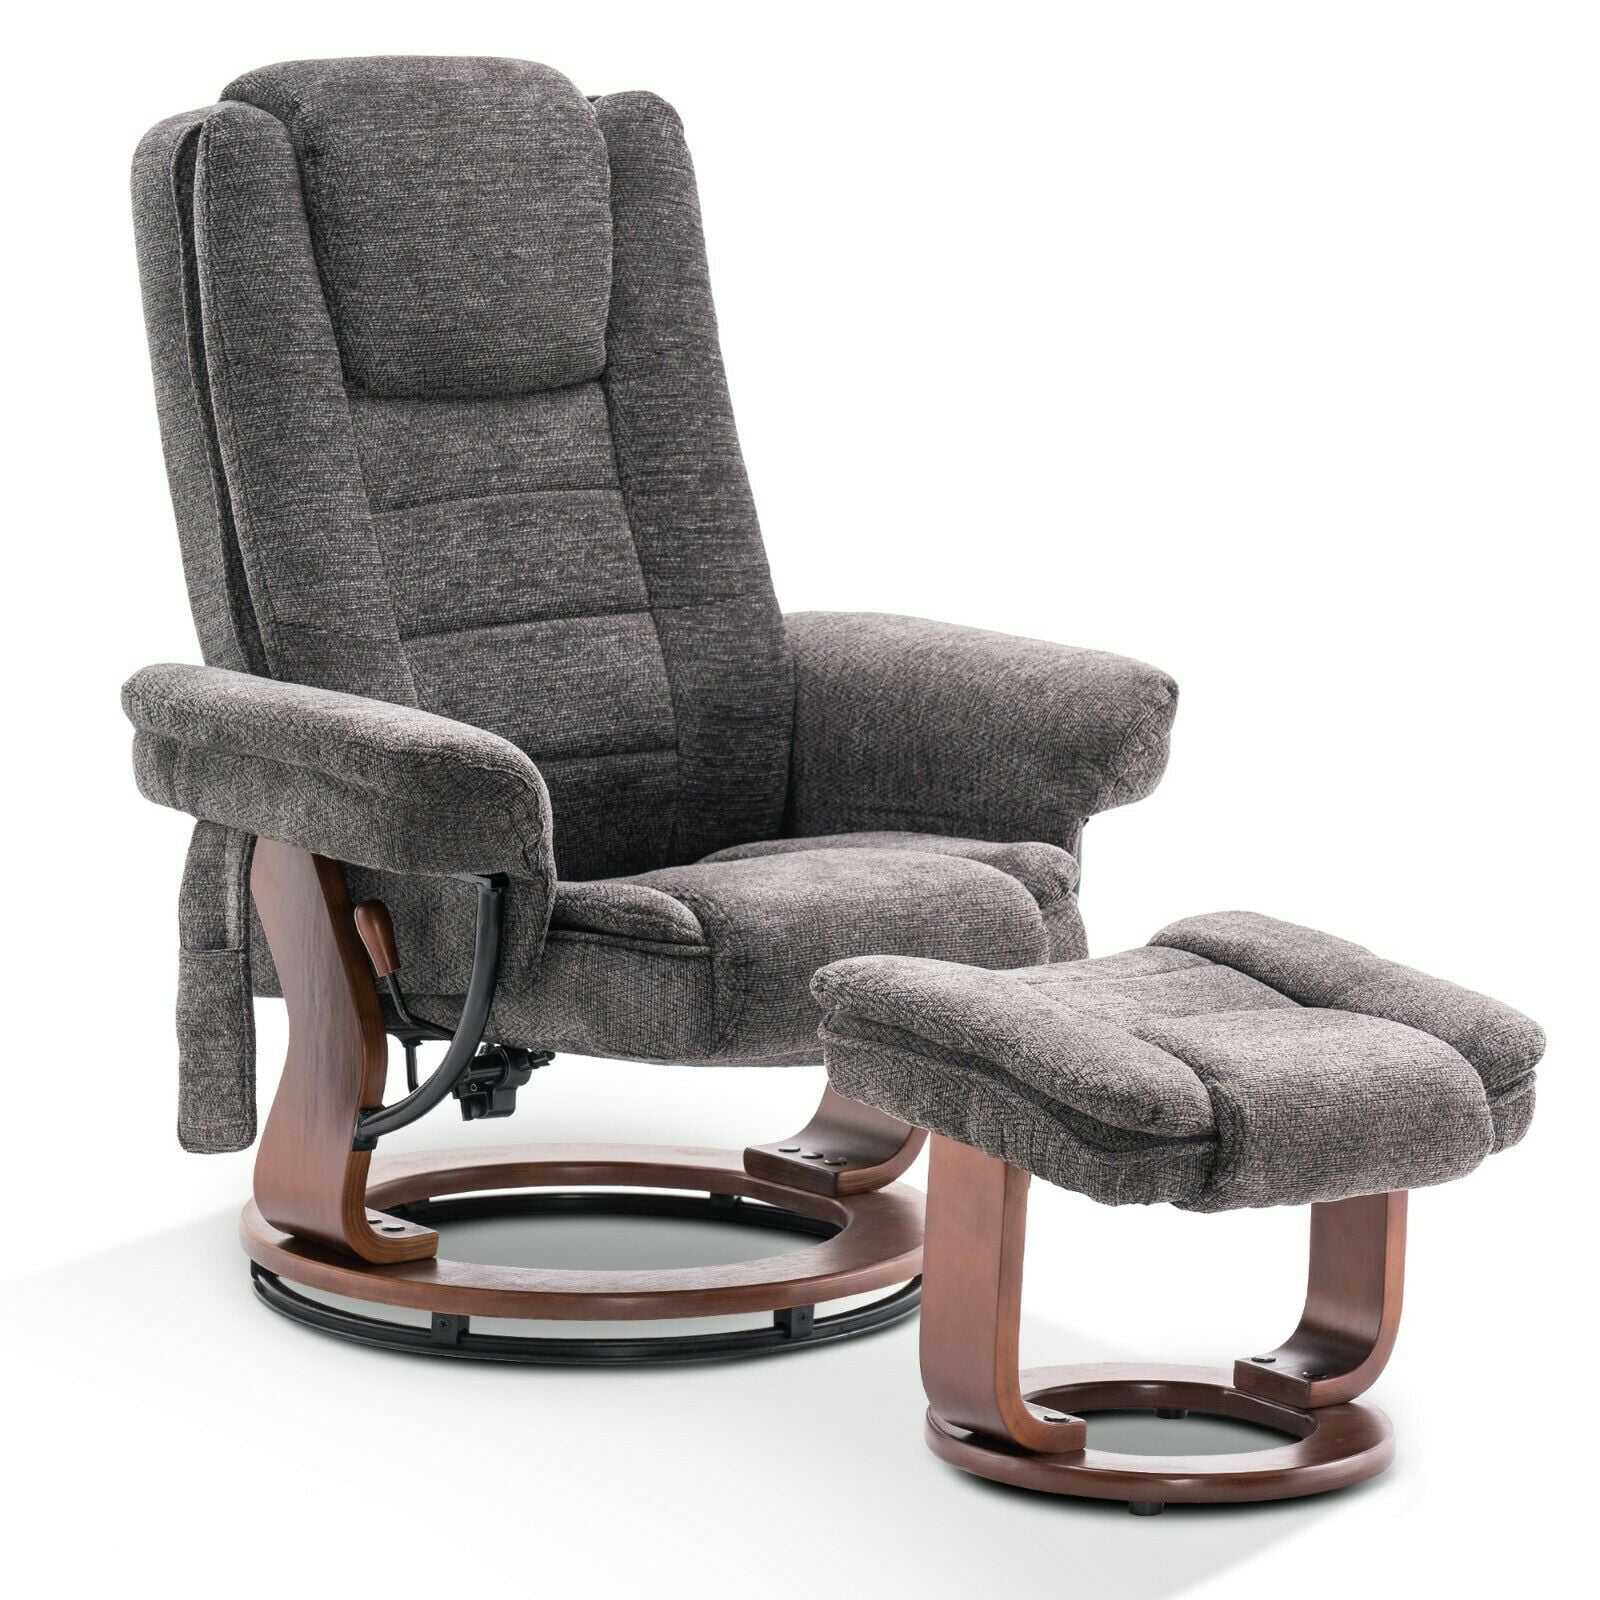 Mcombo Recliner Chair with Ottoman, Fabric Accent Chair with Vibration